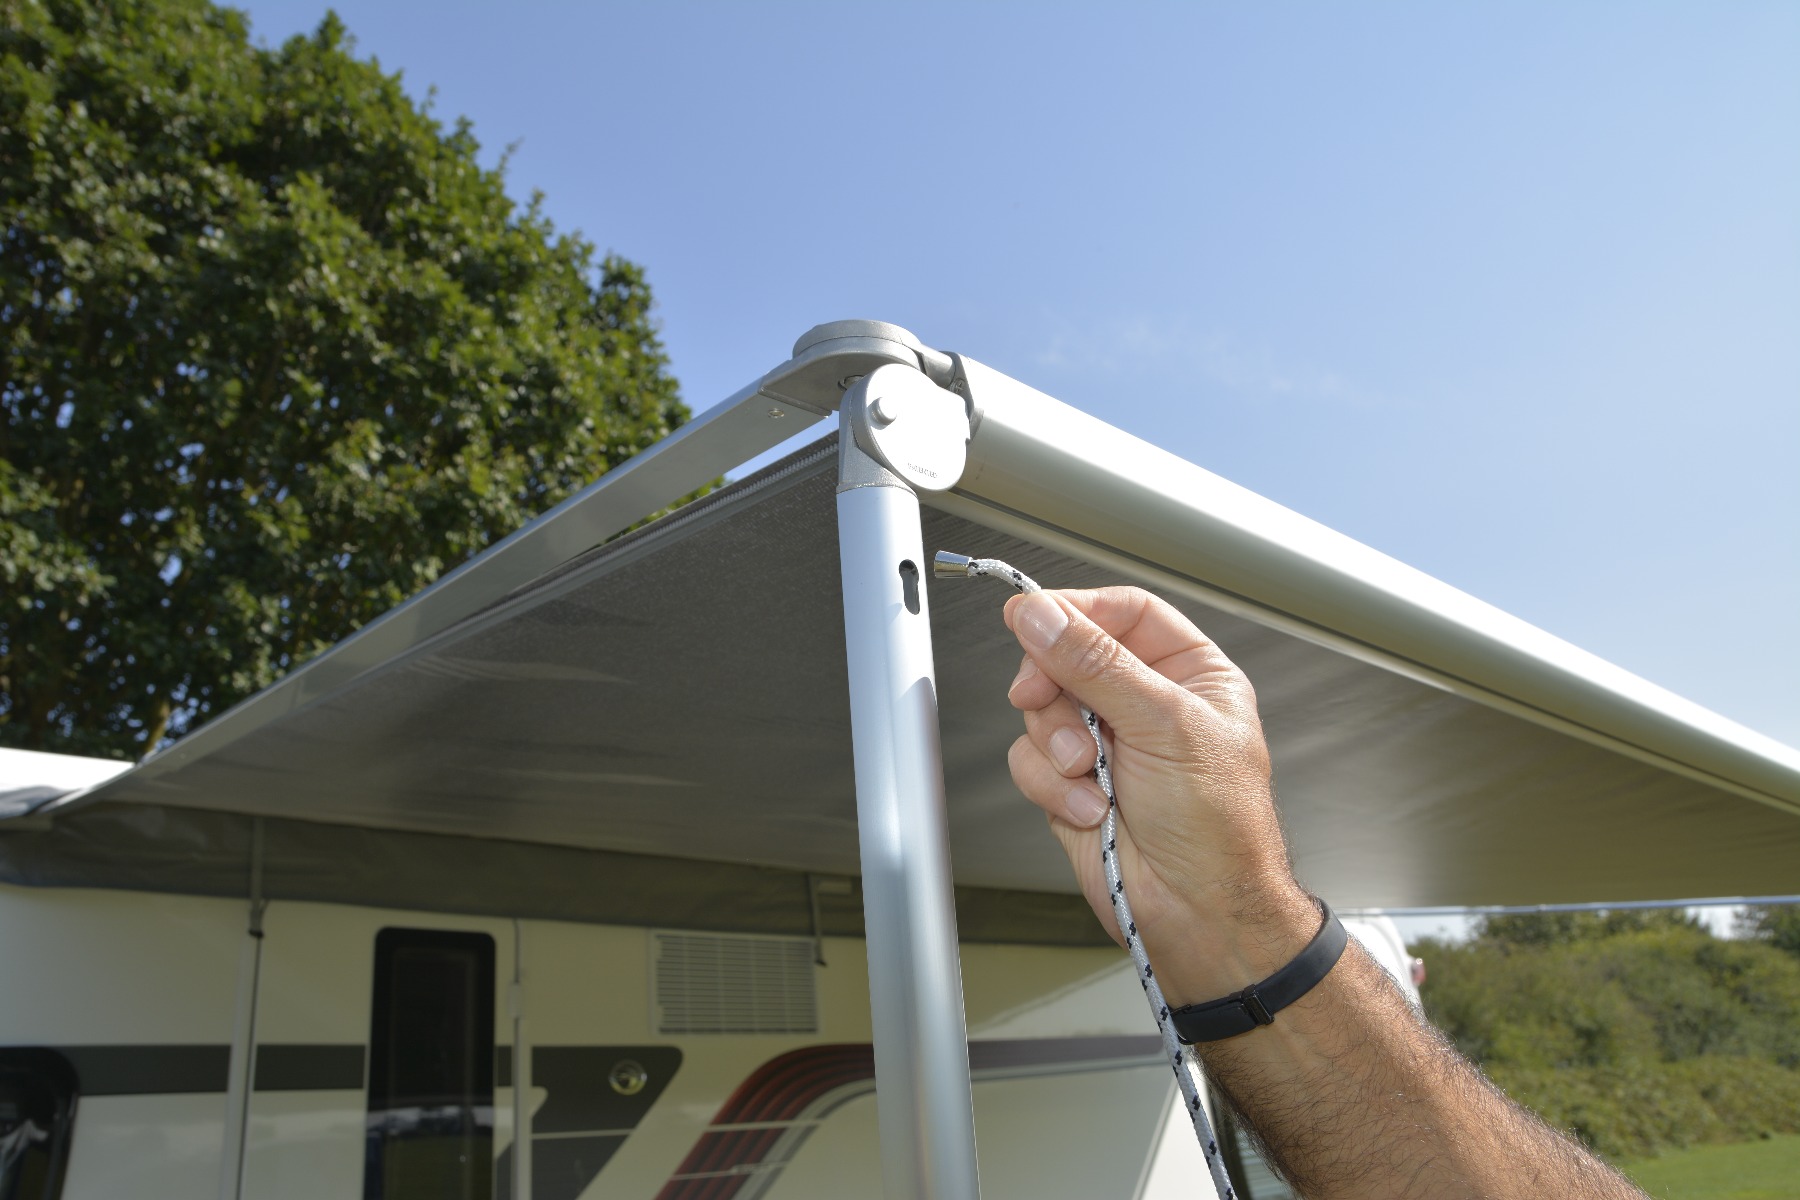 Installing an Awning onto a Campervan and Motorhome